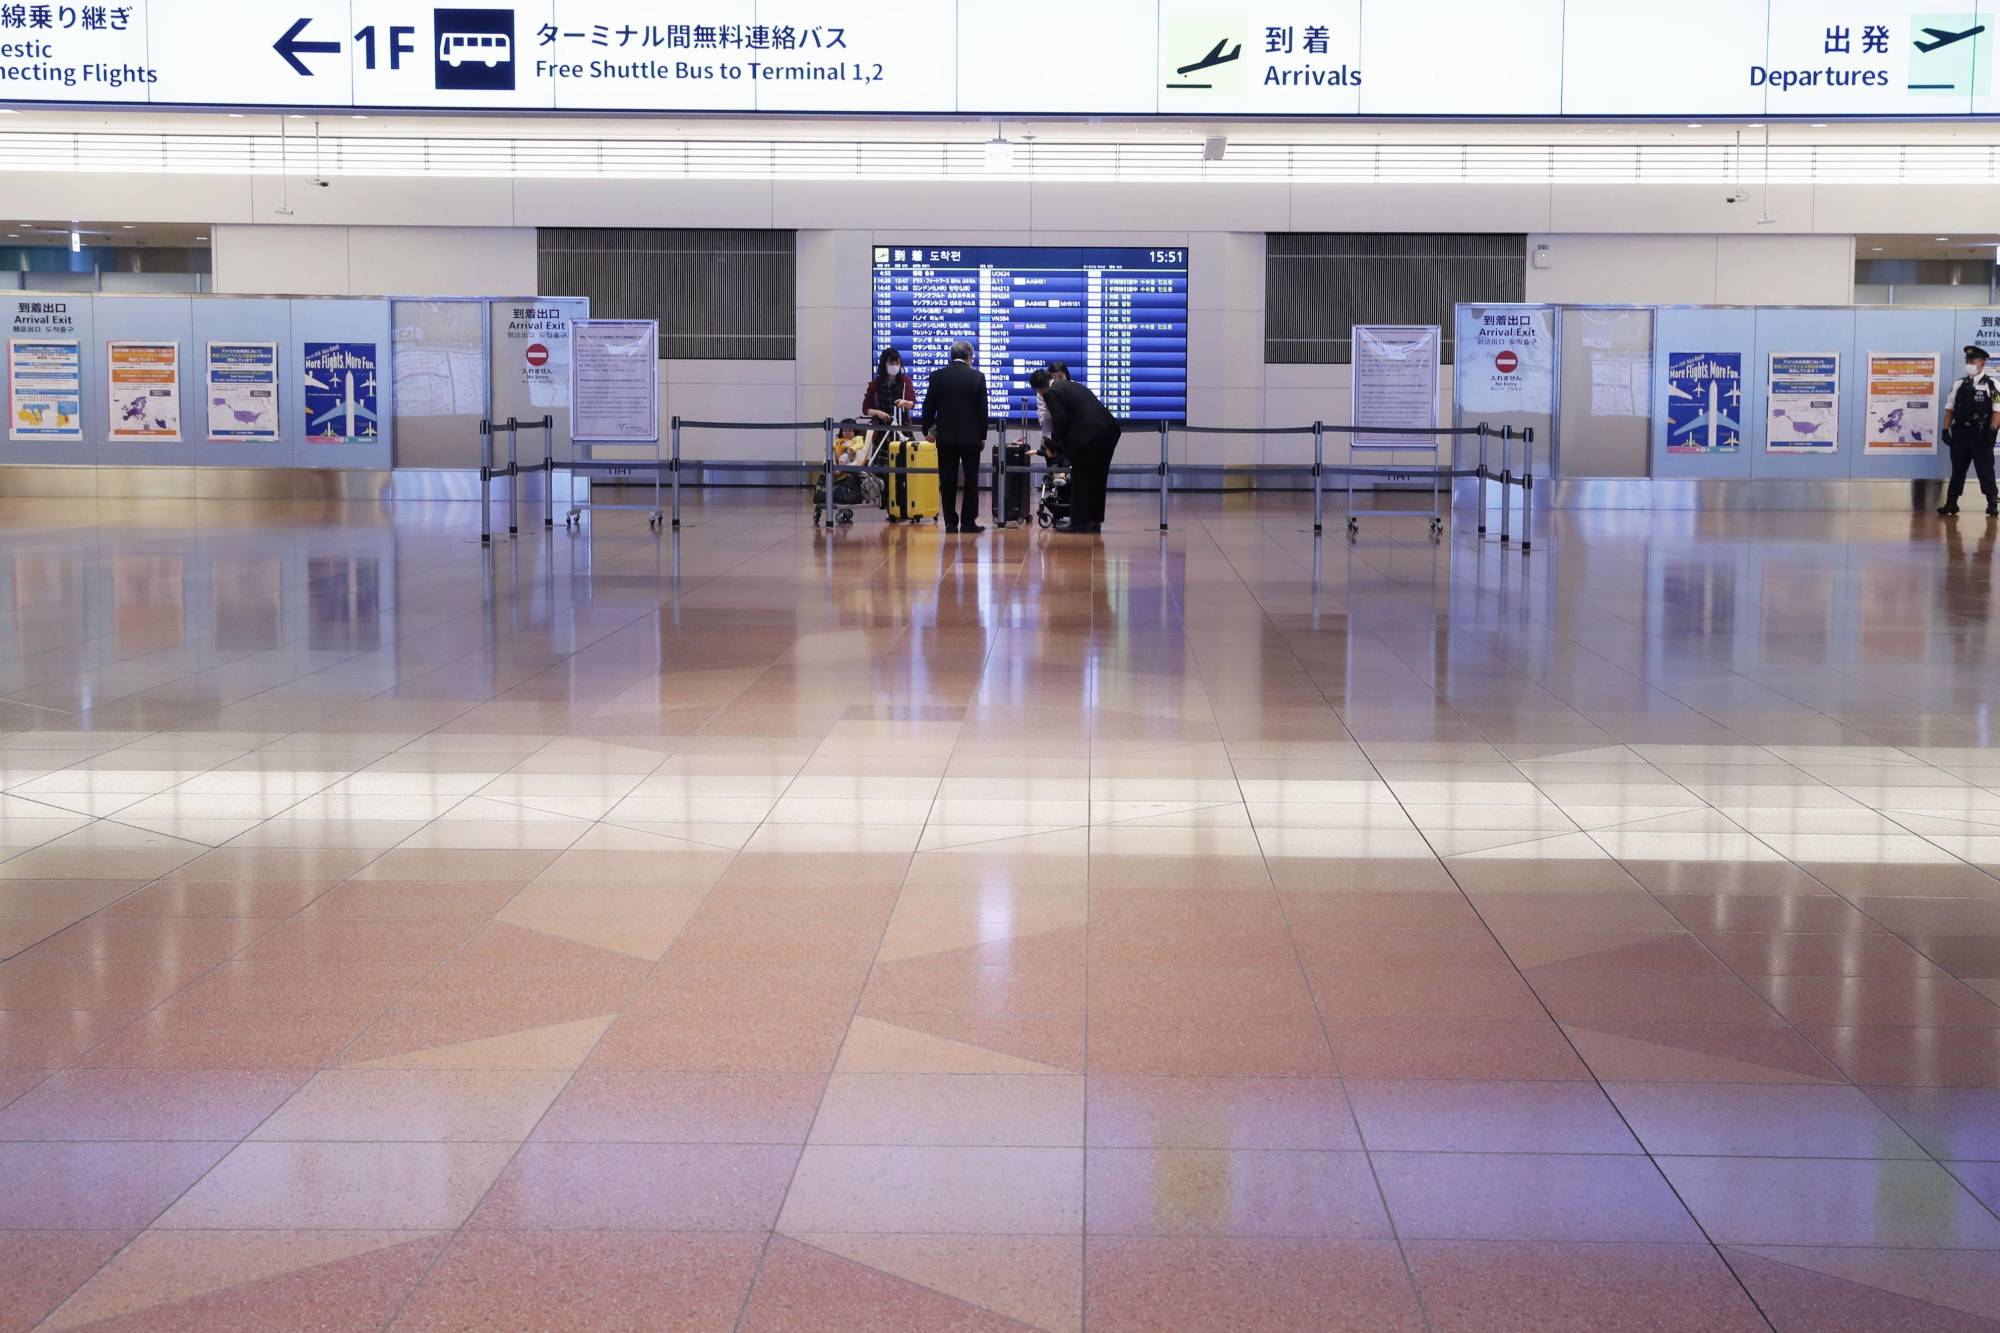 The international arrival lobby at Haneda Airport in Tokyo is almost empty on April 15 amid the novel coronavirus pandemic. | KYODO